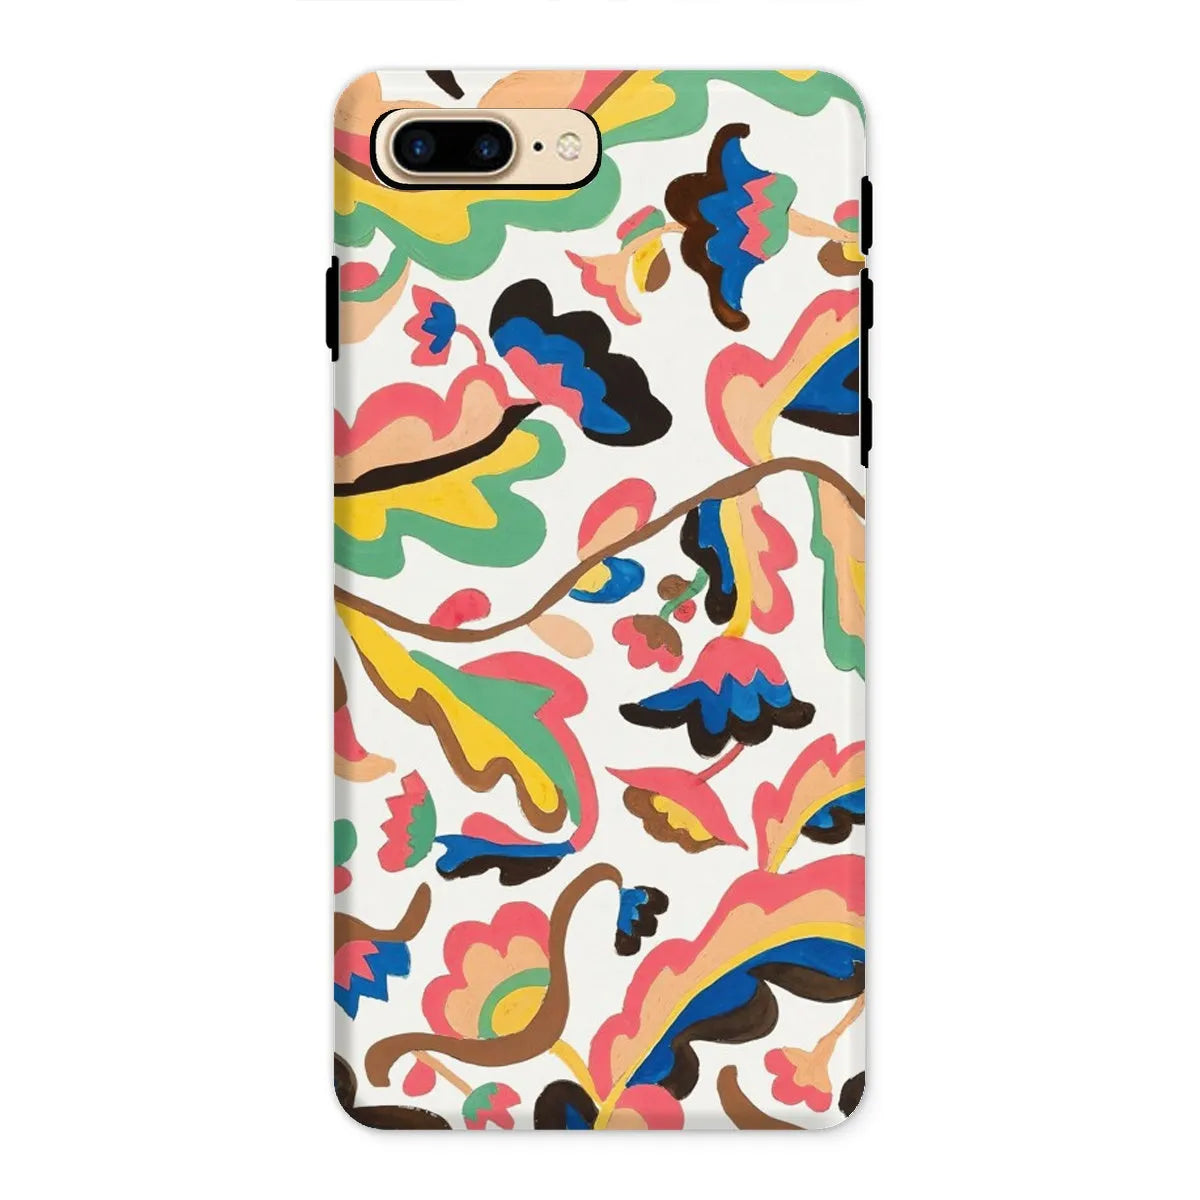 Colcha Floral Aesthetic Pattern Phone Case - Etna Wiswall - Iphone 8 Plus / Matte - Mobile Phone Cases - Aesthetic Art